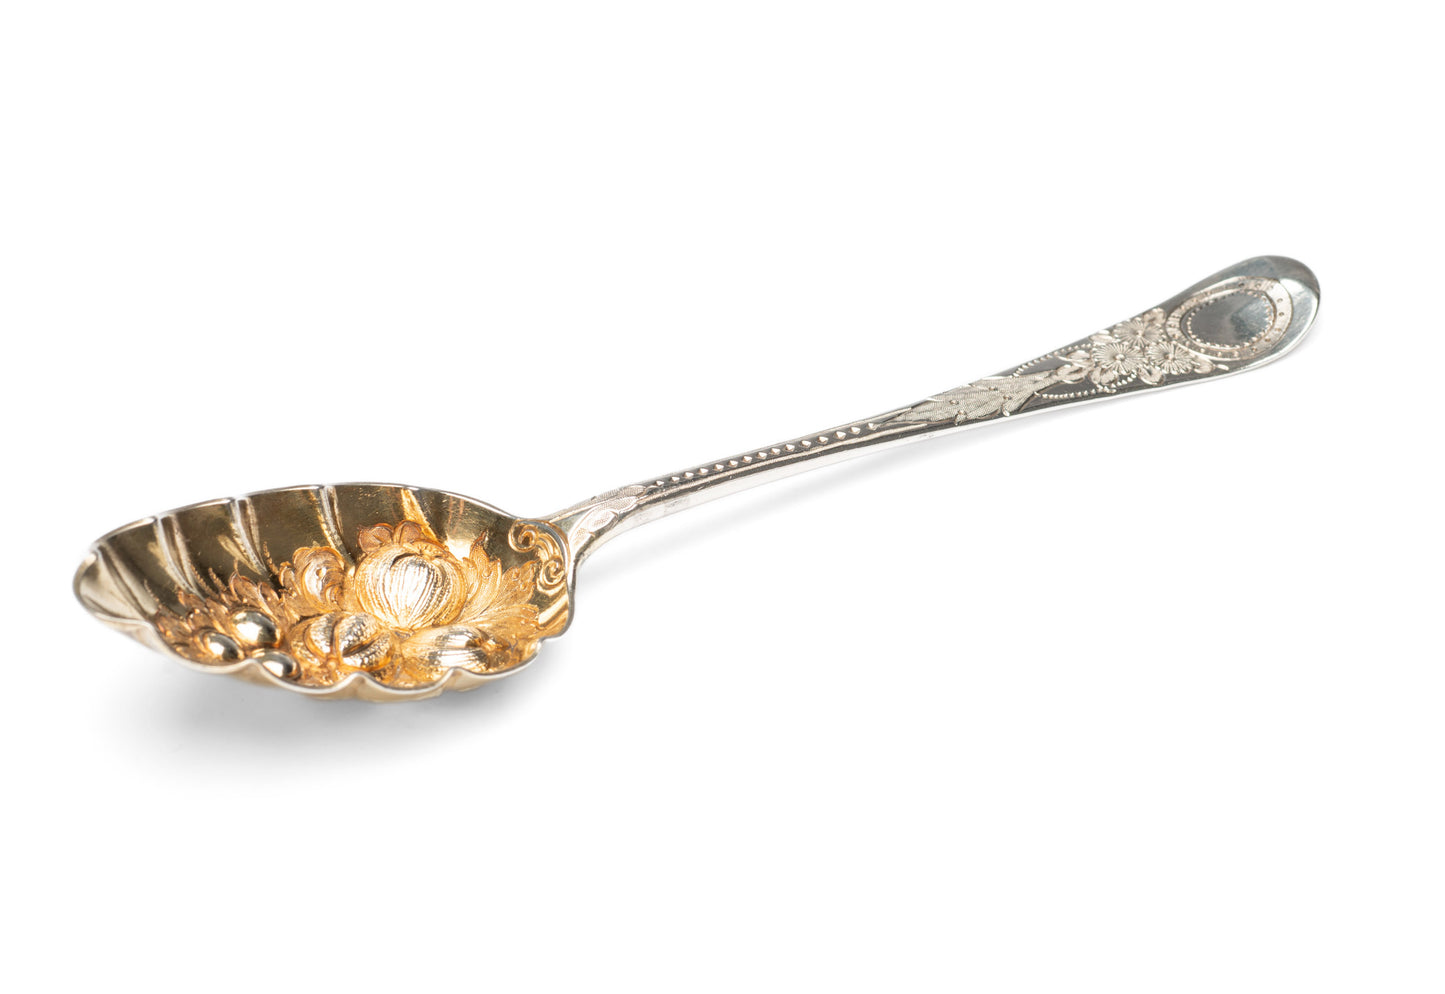 Antique Georgian Hallmarked Silver Gilt Berry Spoon by George Smith II of London (Code 2194)